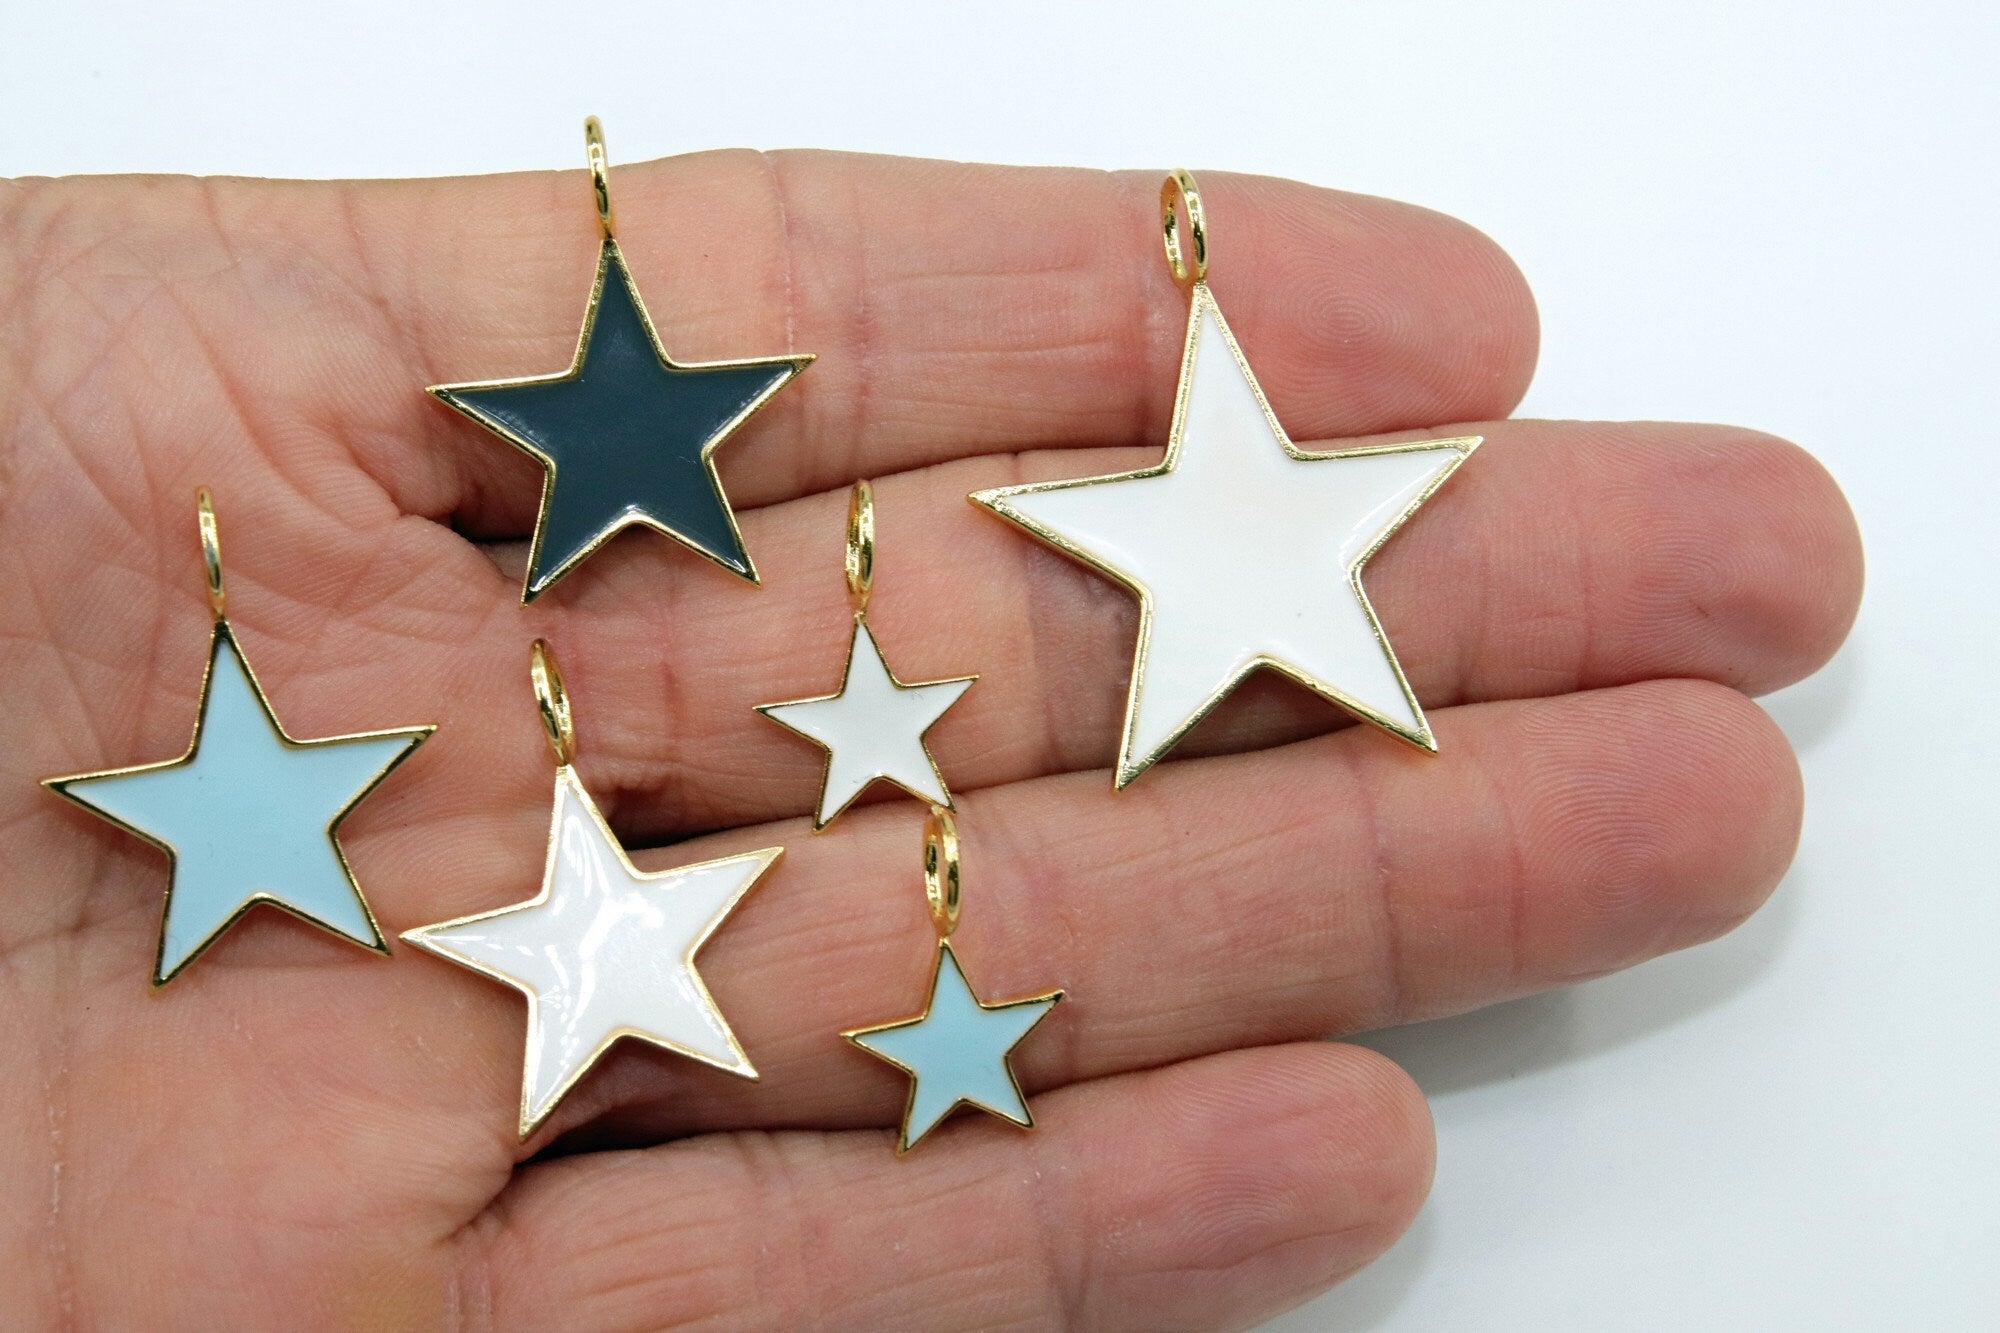 Star Charms and Pendants, Small or Large Gold Starburst in White, Black or Baby Blue Enamel Big Hole Bails